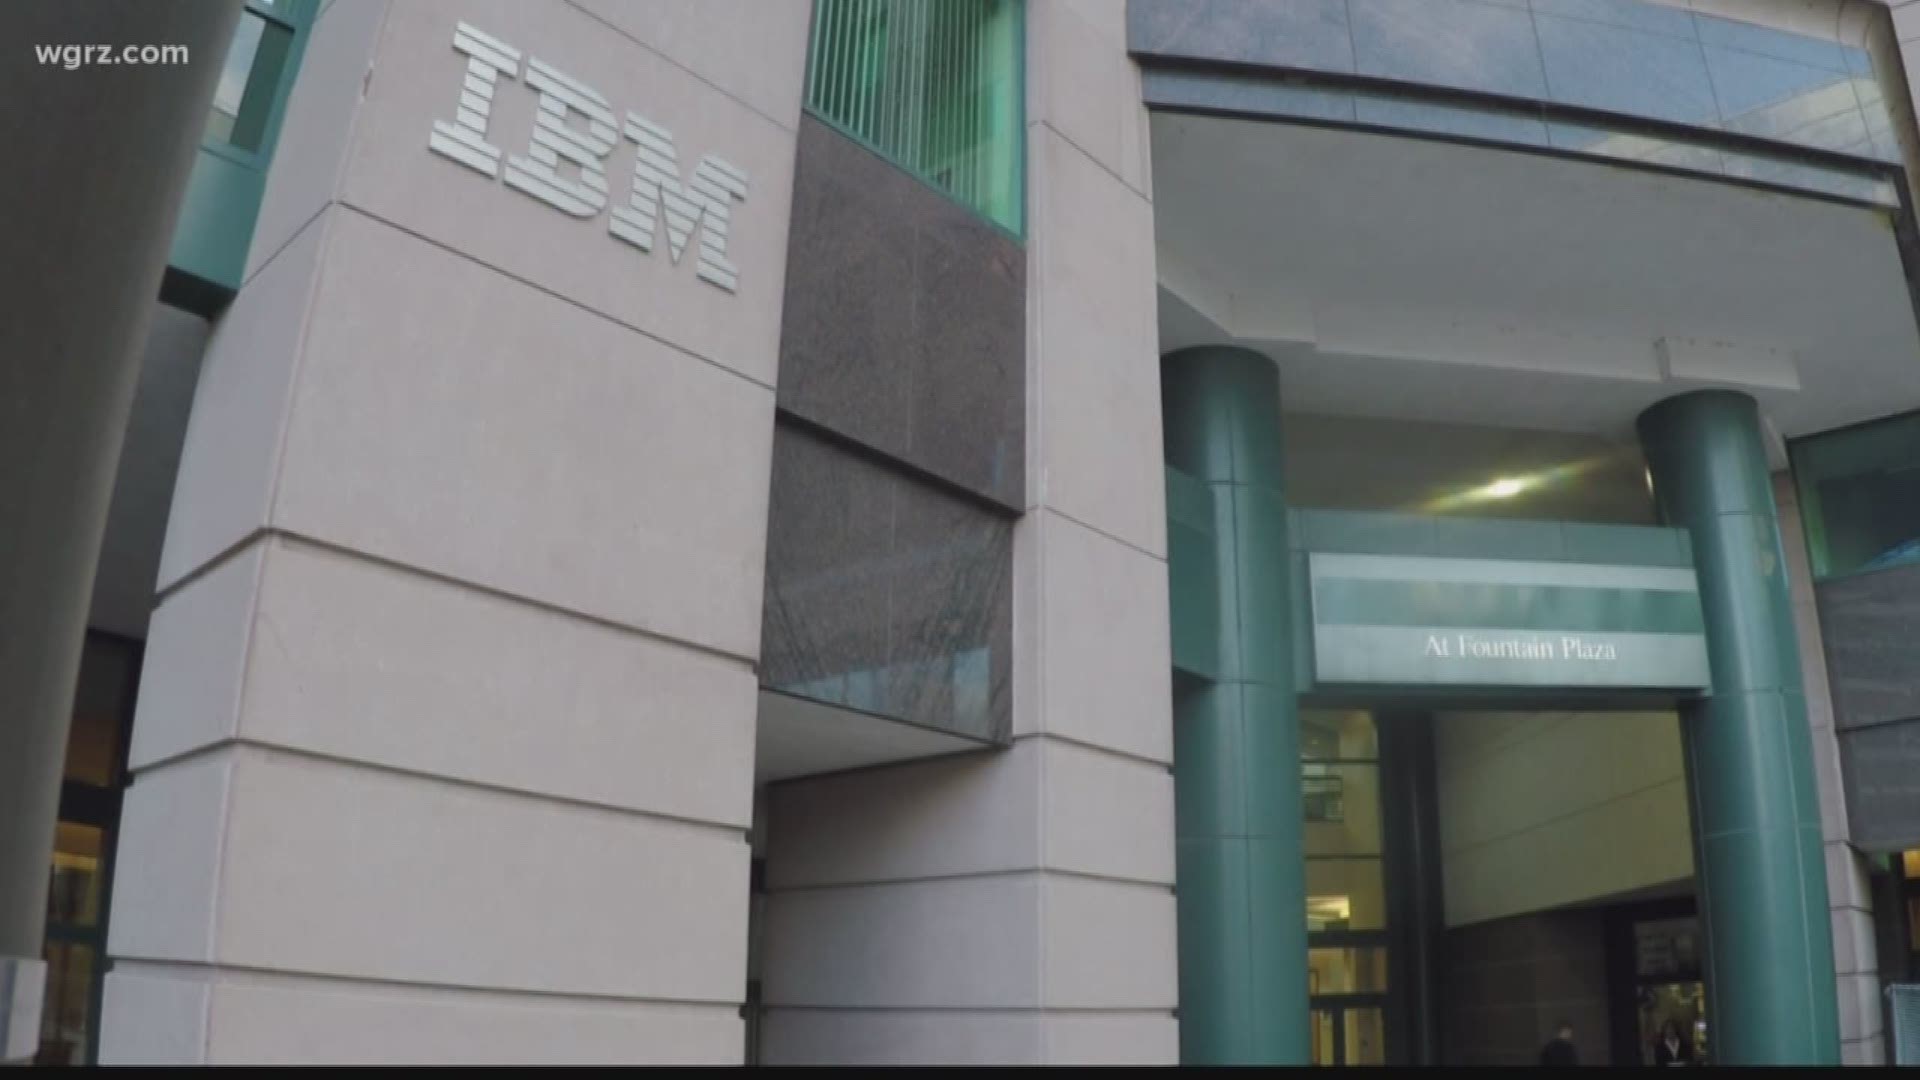 Where Are The 500 High Paying IBM Jobs?